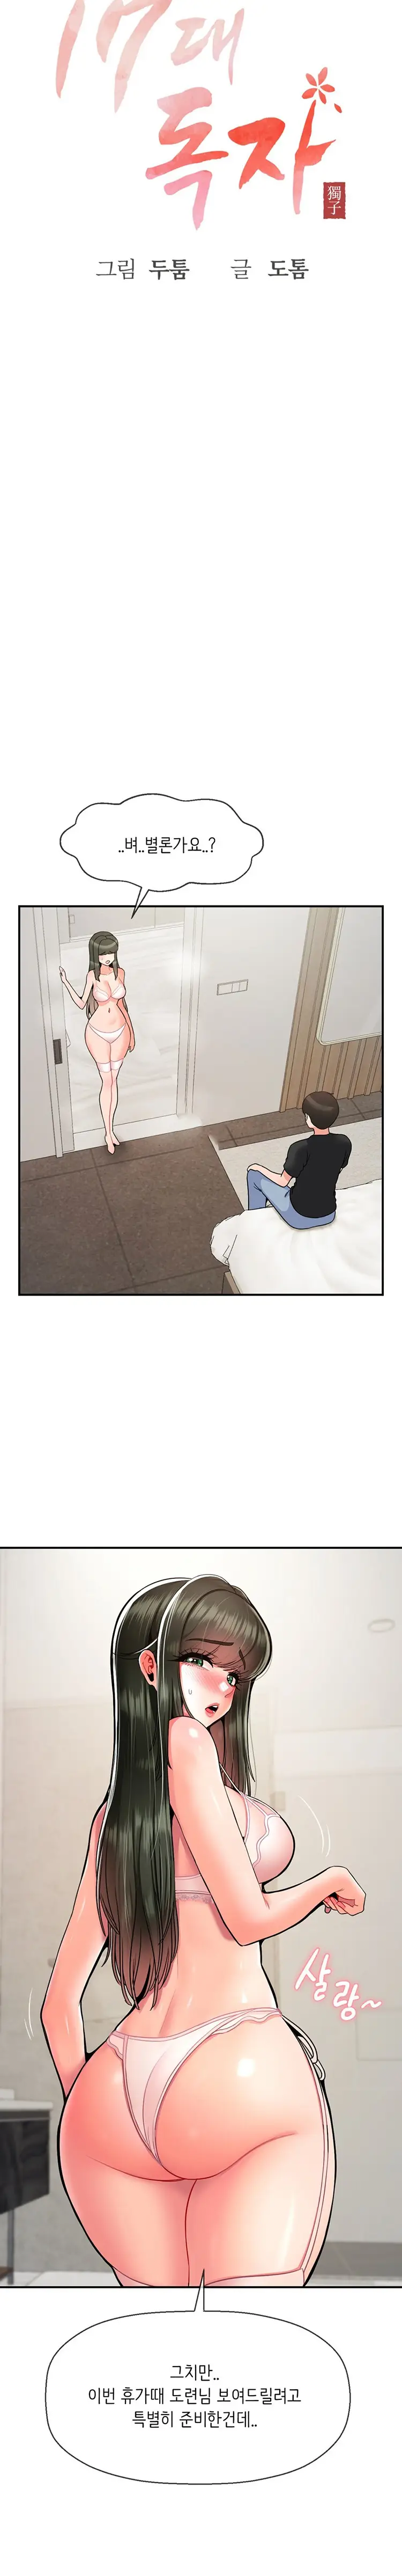 seventeenth-only-son-raw-chap-32-1